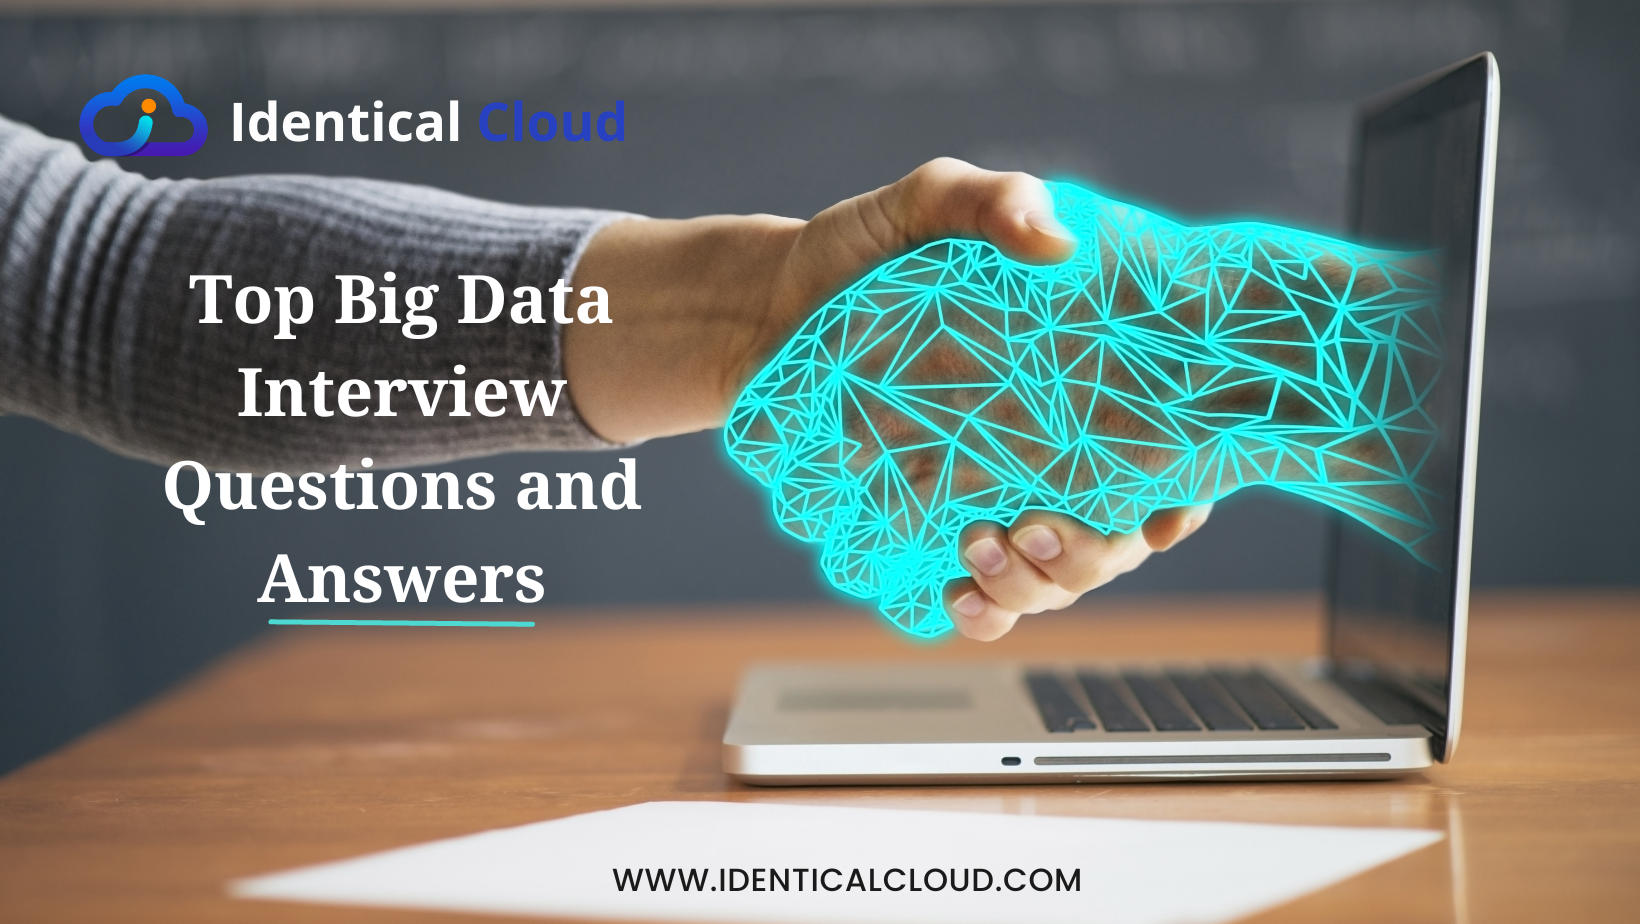 Top Big Data Interview Questions and Answers - identicalcloud.com